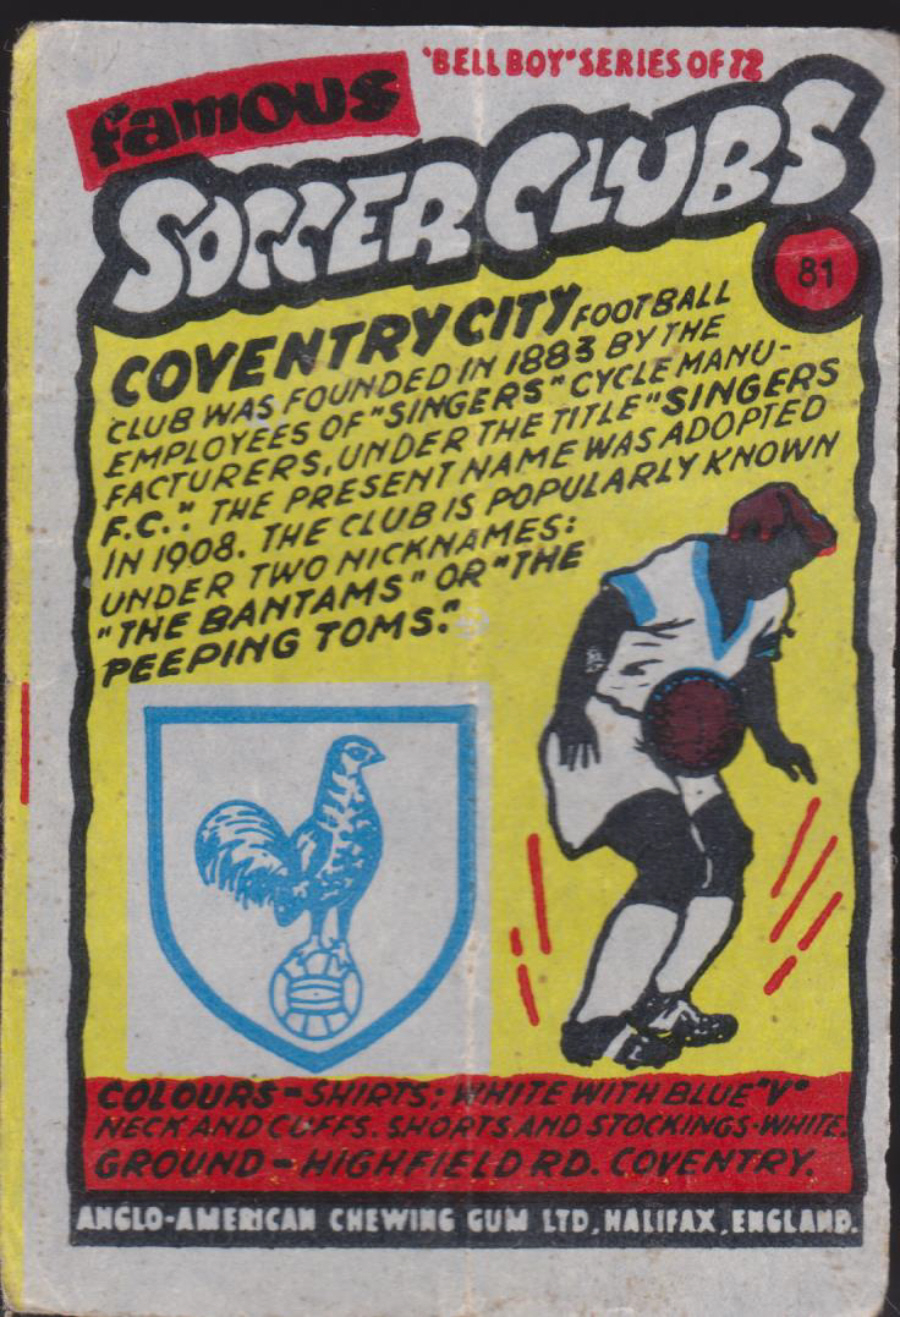 Anglo-American-Chewing-Gum-Wax-Wrapper-Famous-Soccer-Clubs-No-81 - Coventry City - Click Image to Close